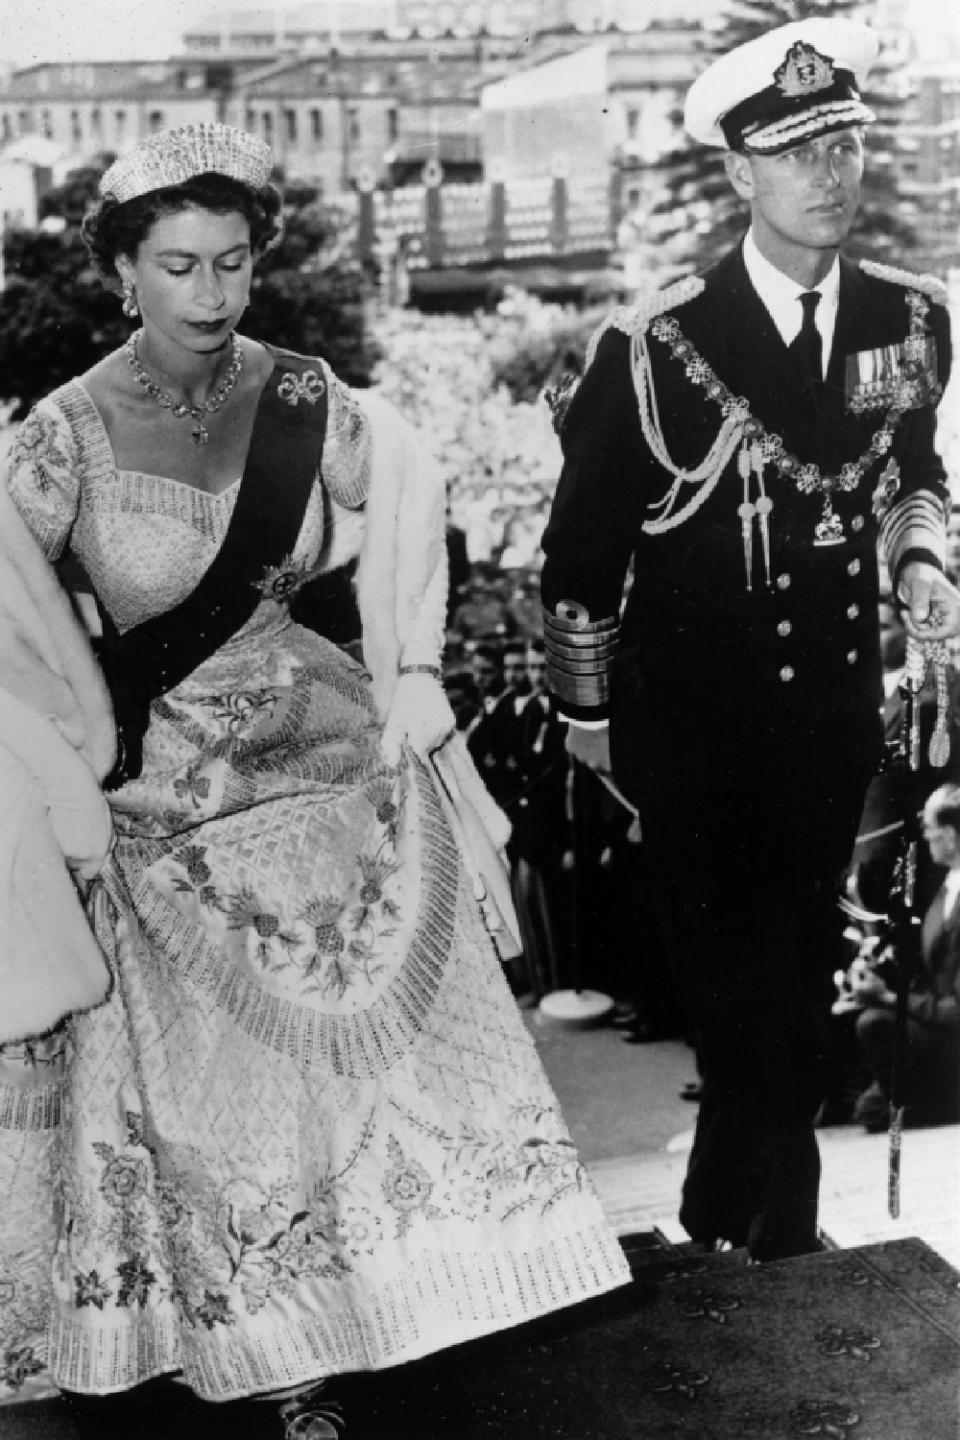 Queen Elizabeth and Prince Philip at the Queen's Coronation